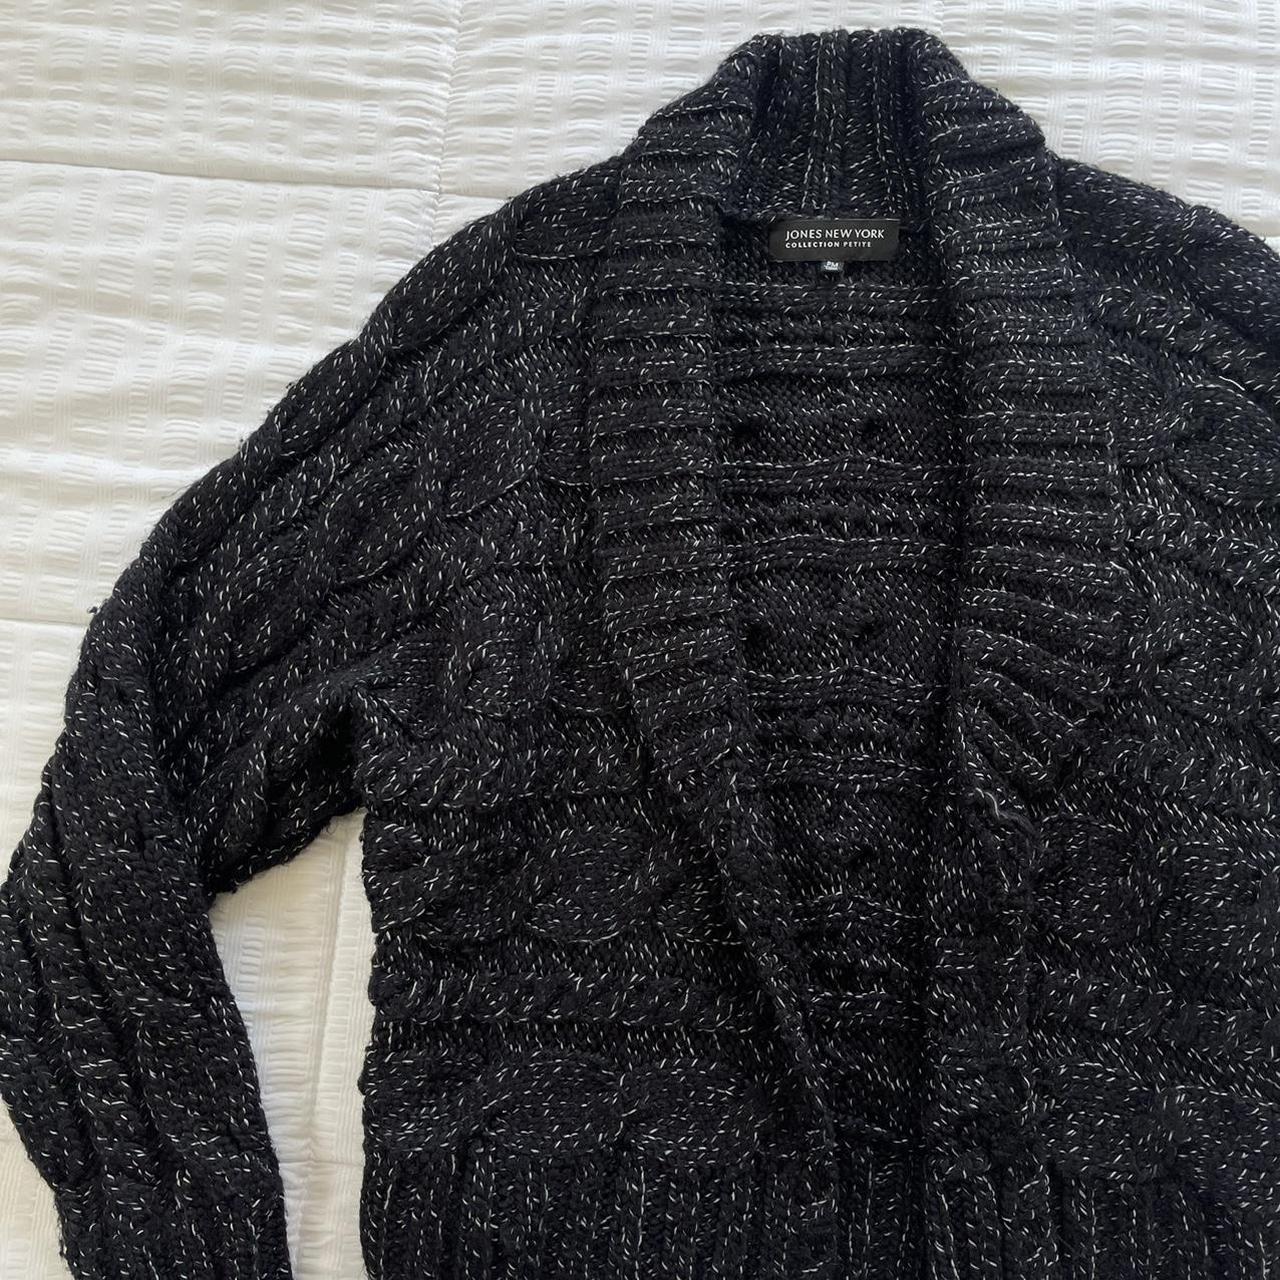 Product Image 3 - Black Cable Knit Cardigan🌻

❀ labeled